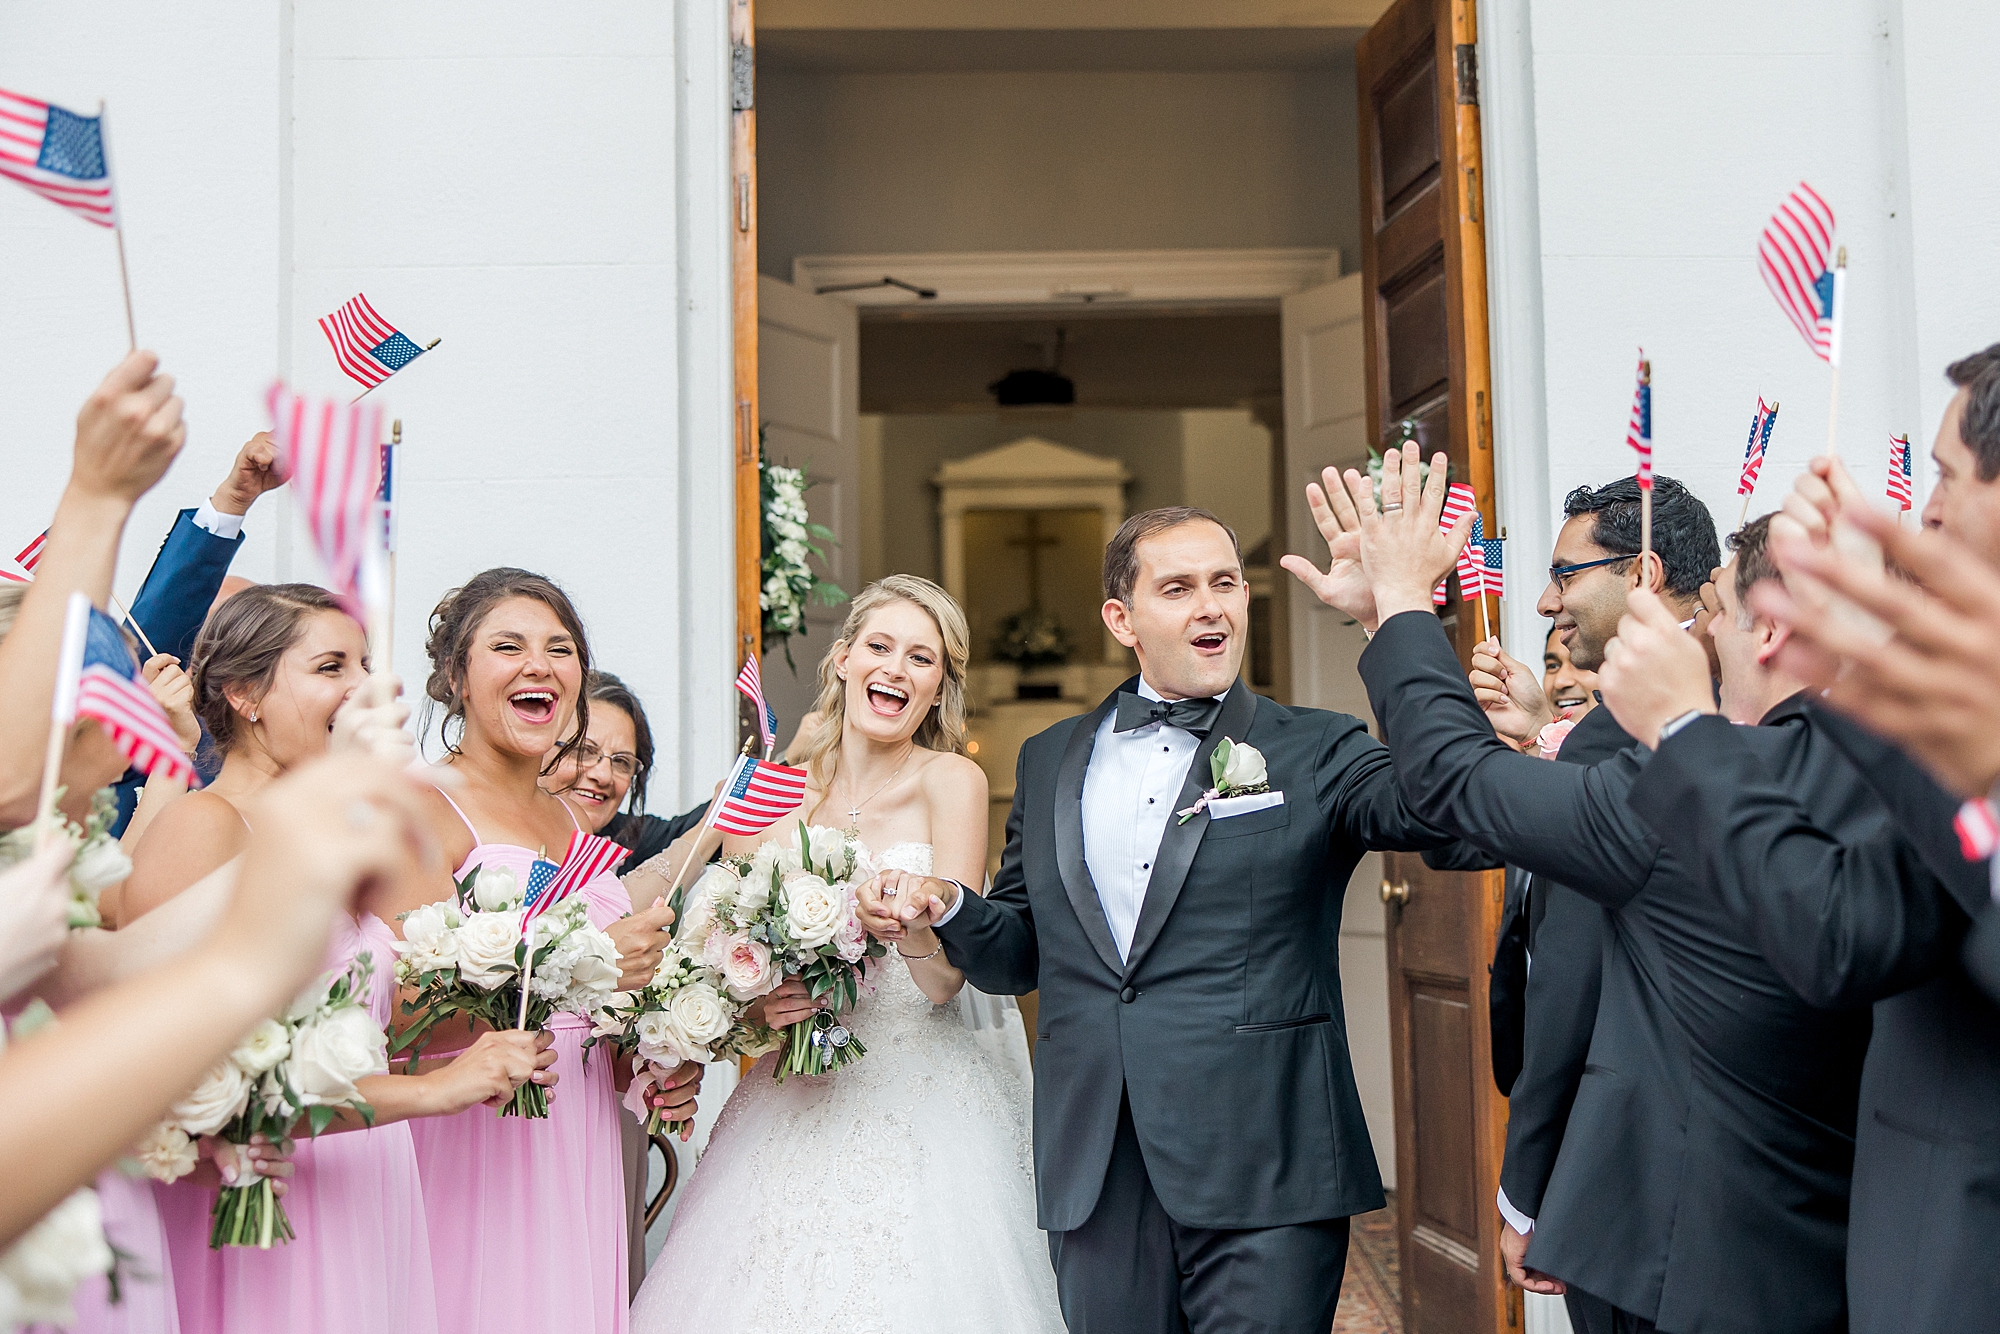 newlyweds celebrate exiting the church as a married couple